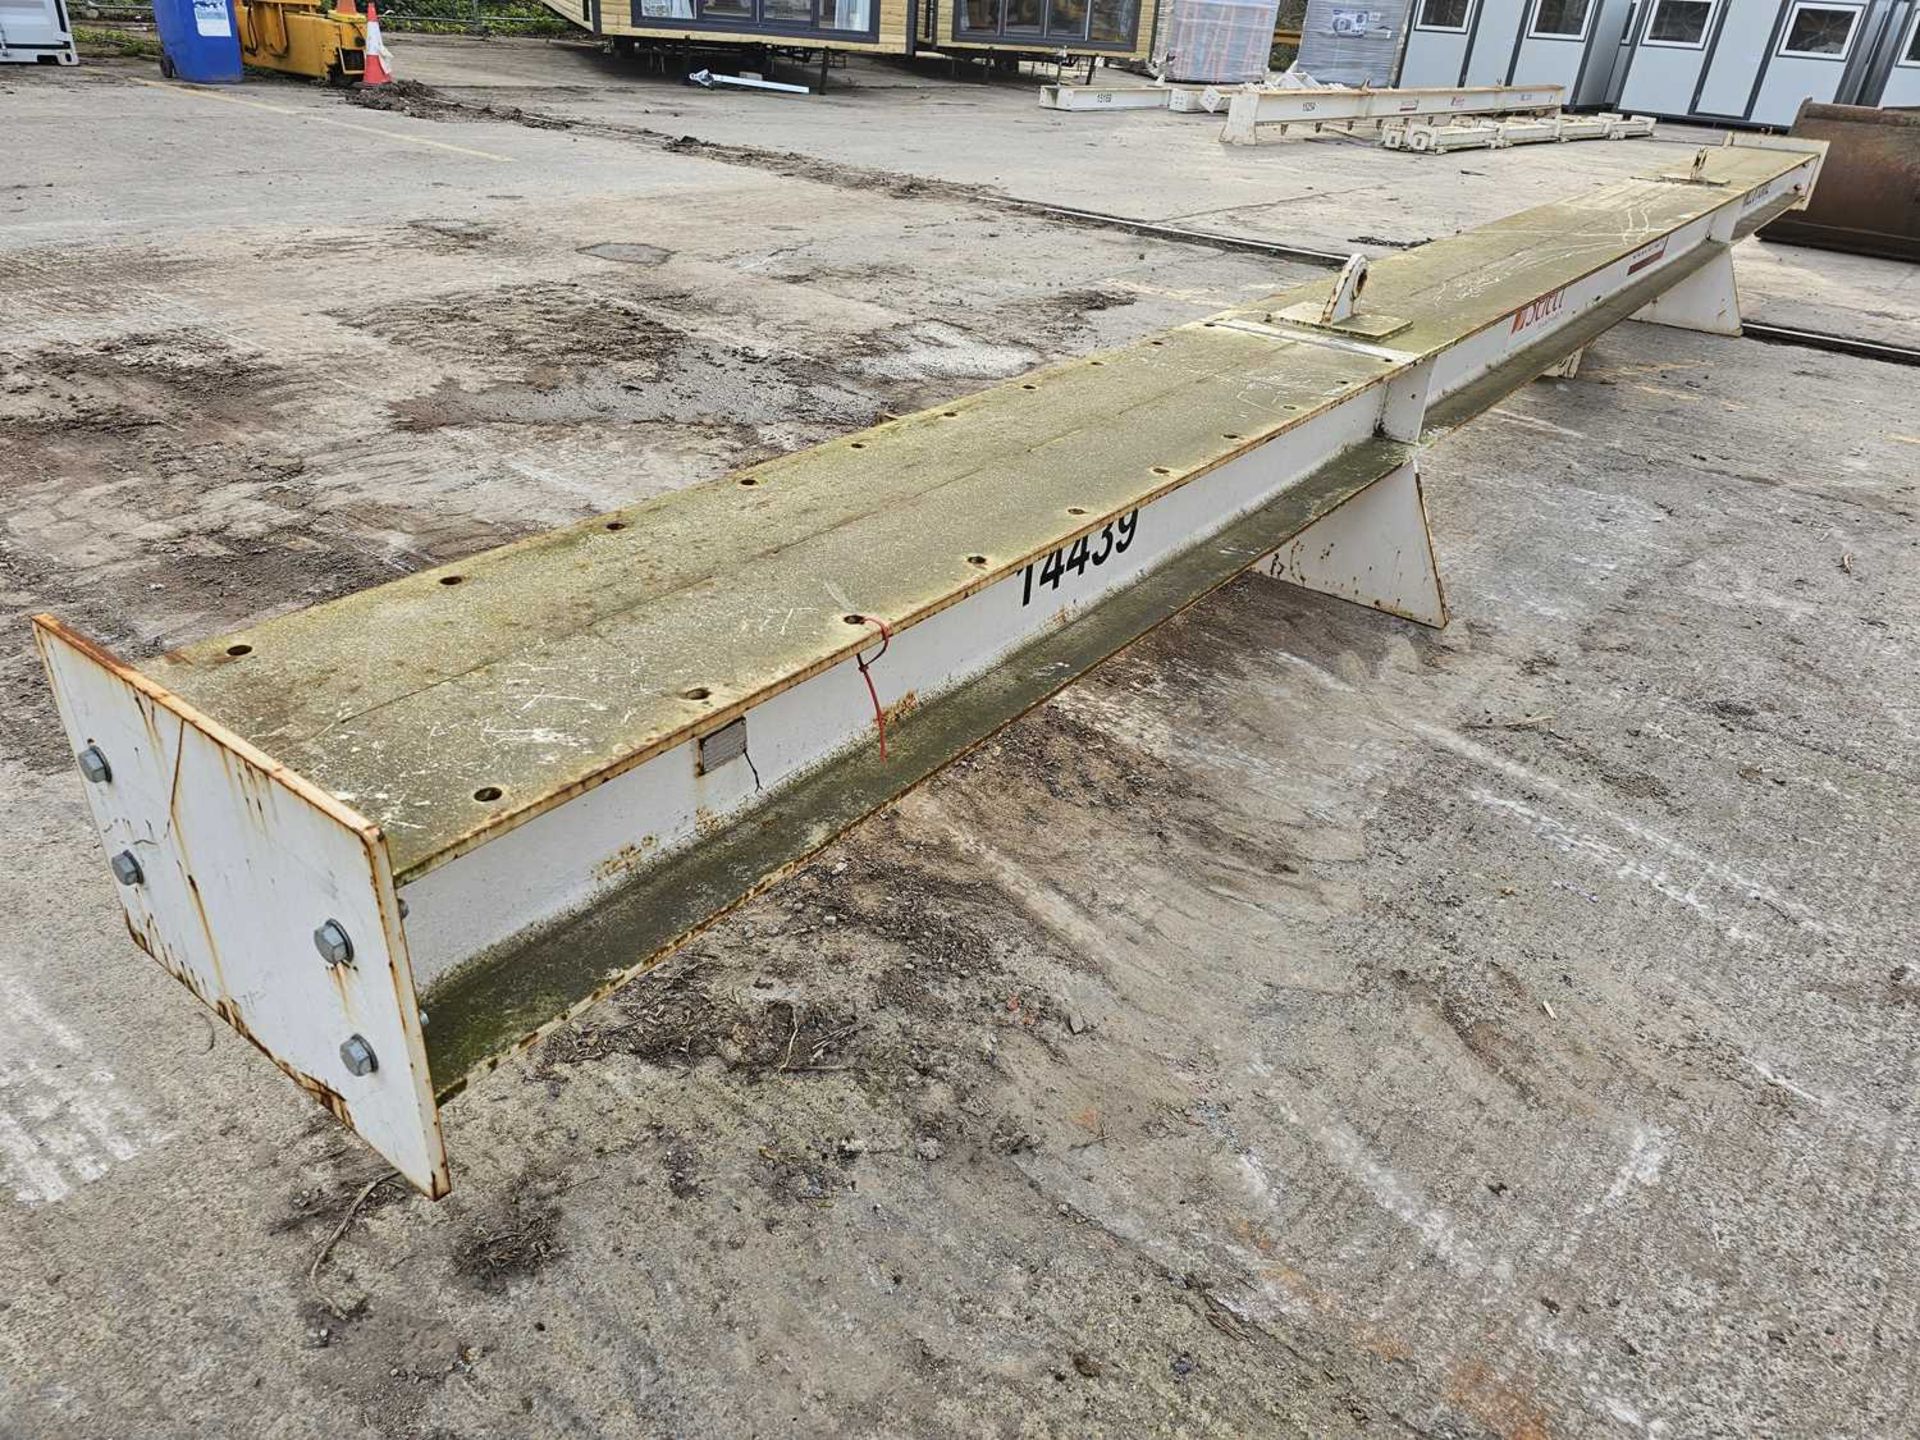 2019 Section Lift 10.65m x 2.5m Adjustable 8 Ton Spreader Beam - Image 2 of 7